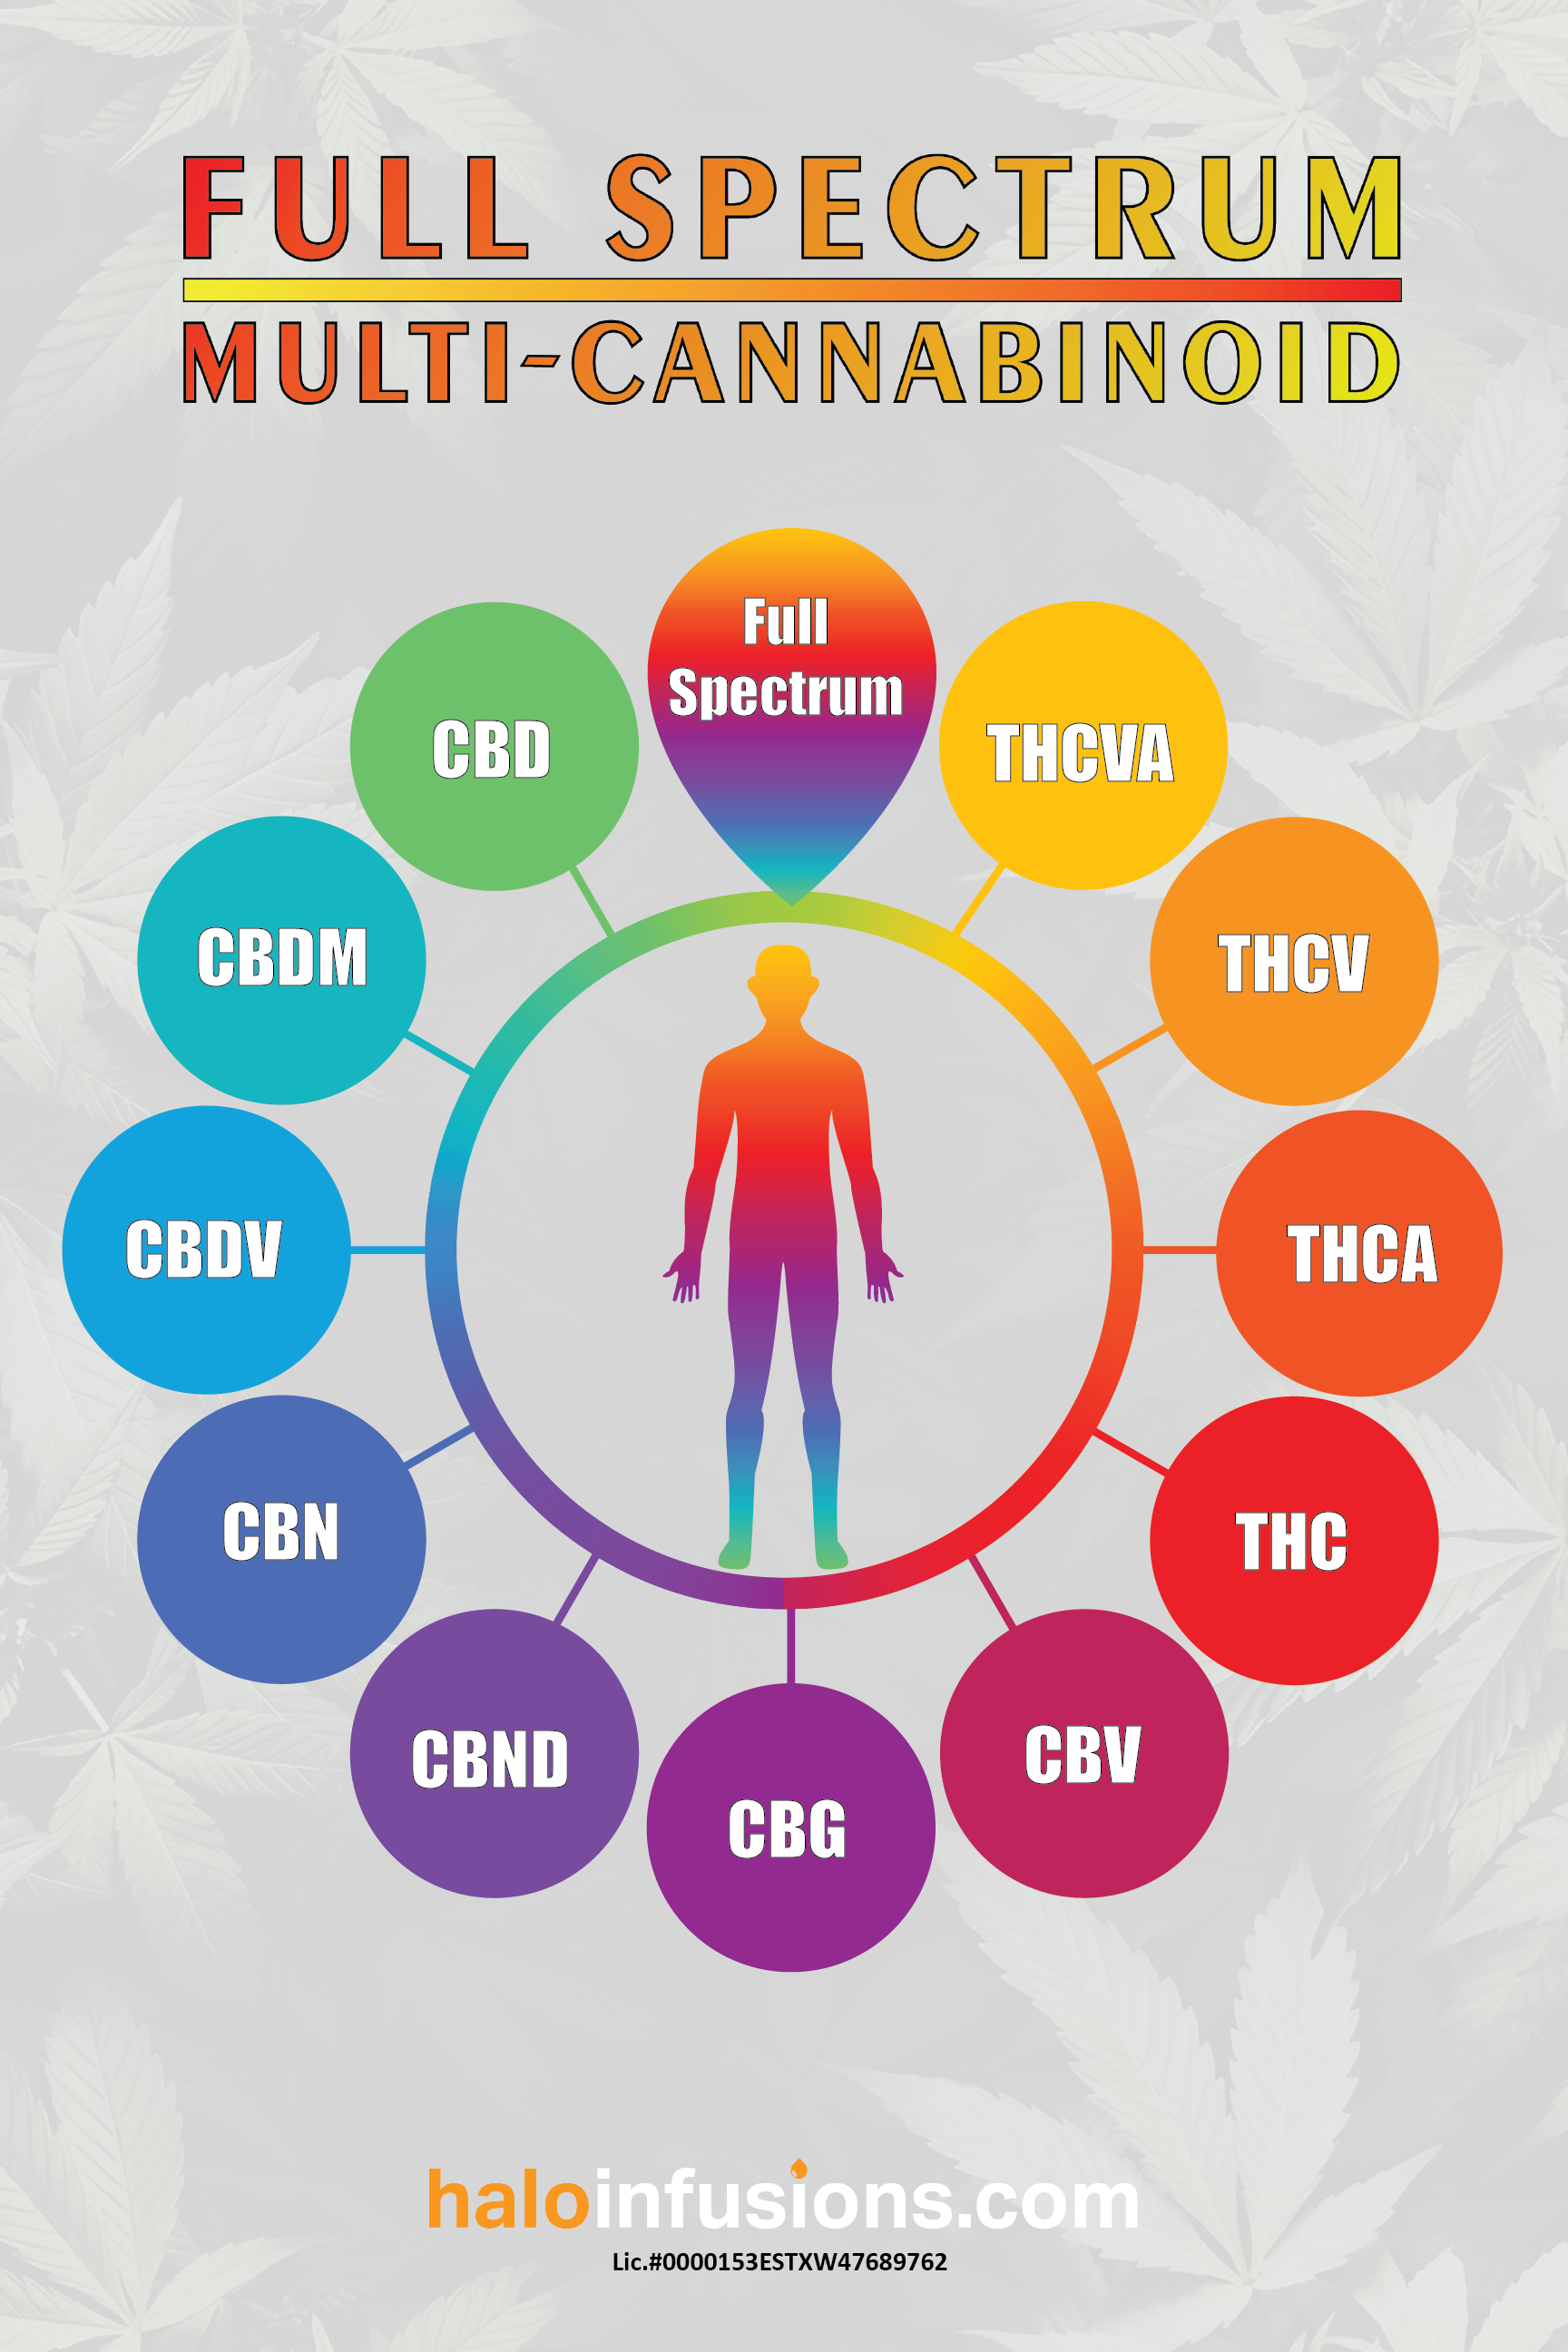 Full Spectrum Poster - Halo Infusions. educational poster